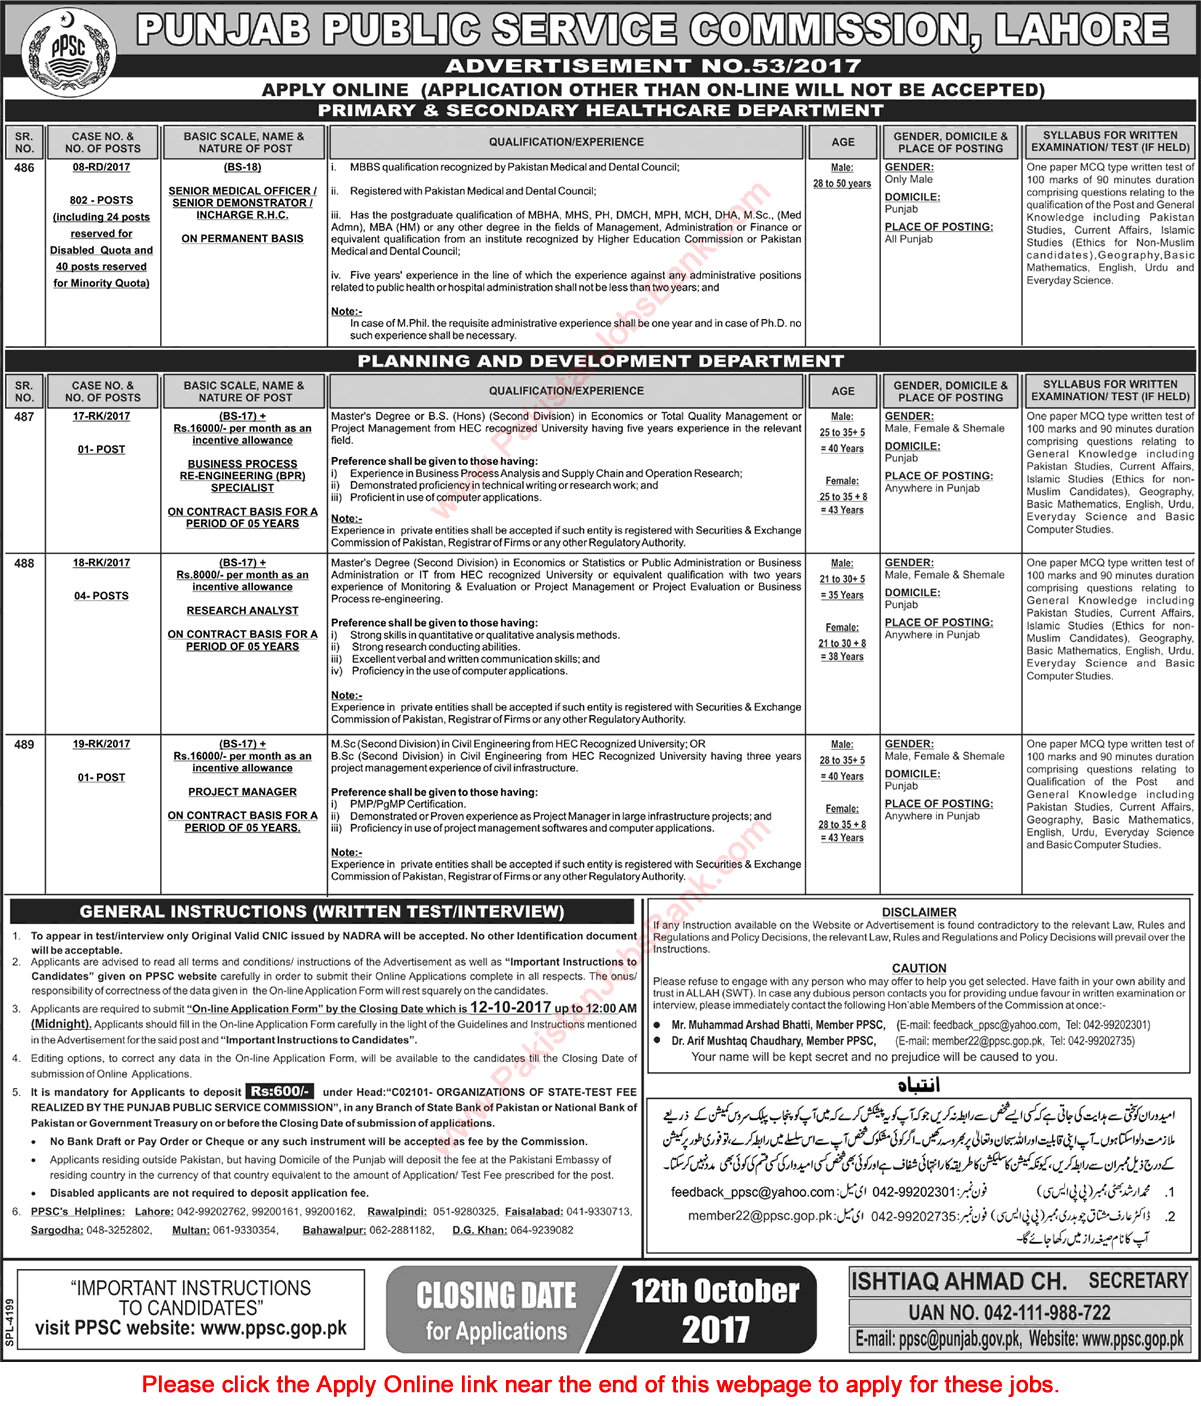 PPSC Jobs September 2017 Apply Online Consolidated Advertisement No. 53/2017 Latest